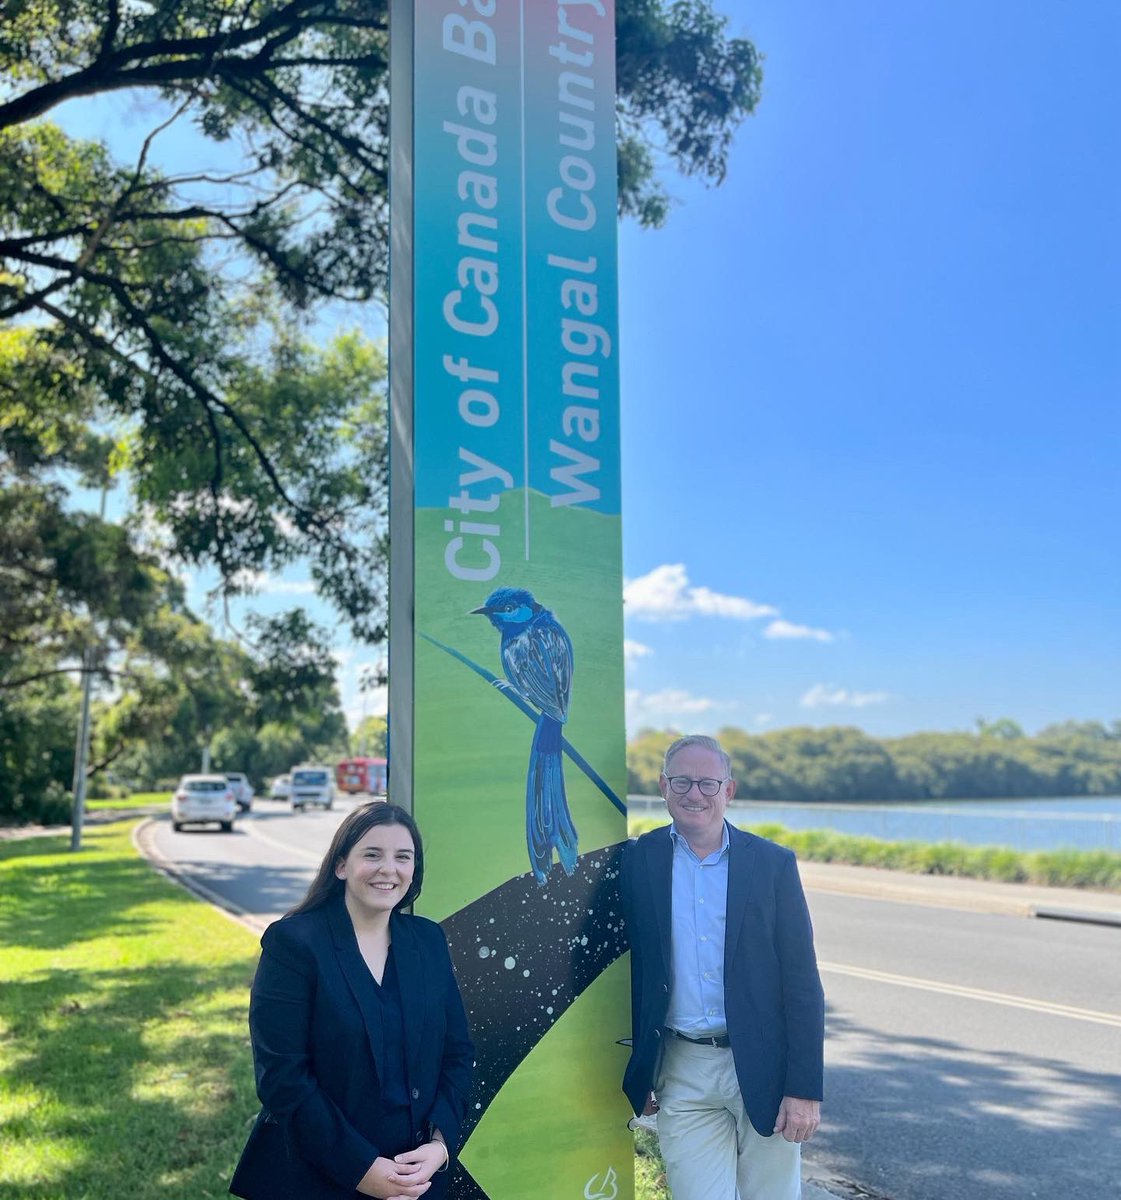 Out and about in Drummoyne this afternoon with the outstanding Li...